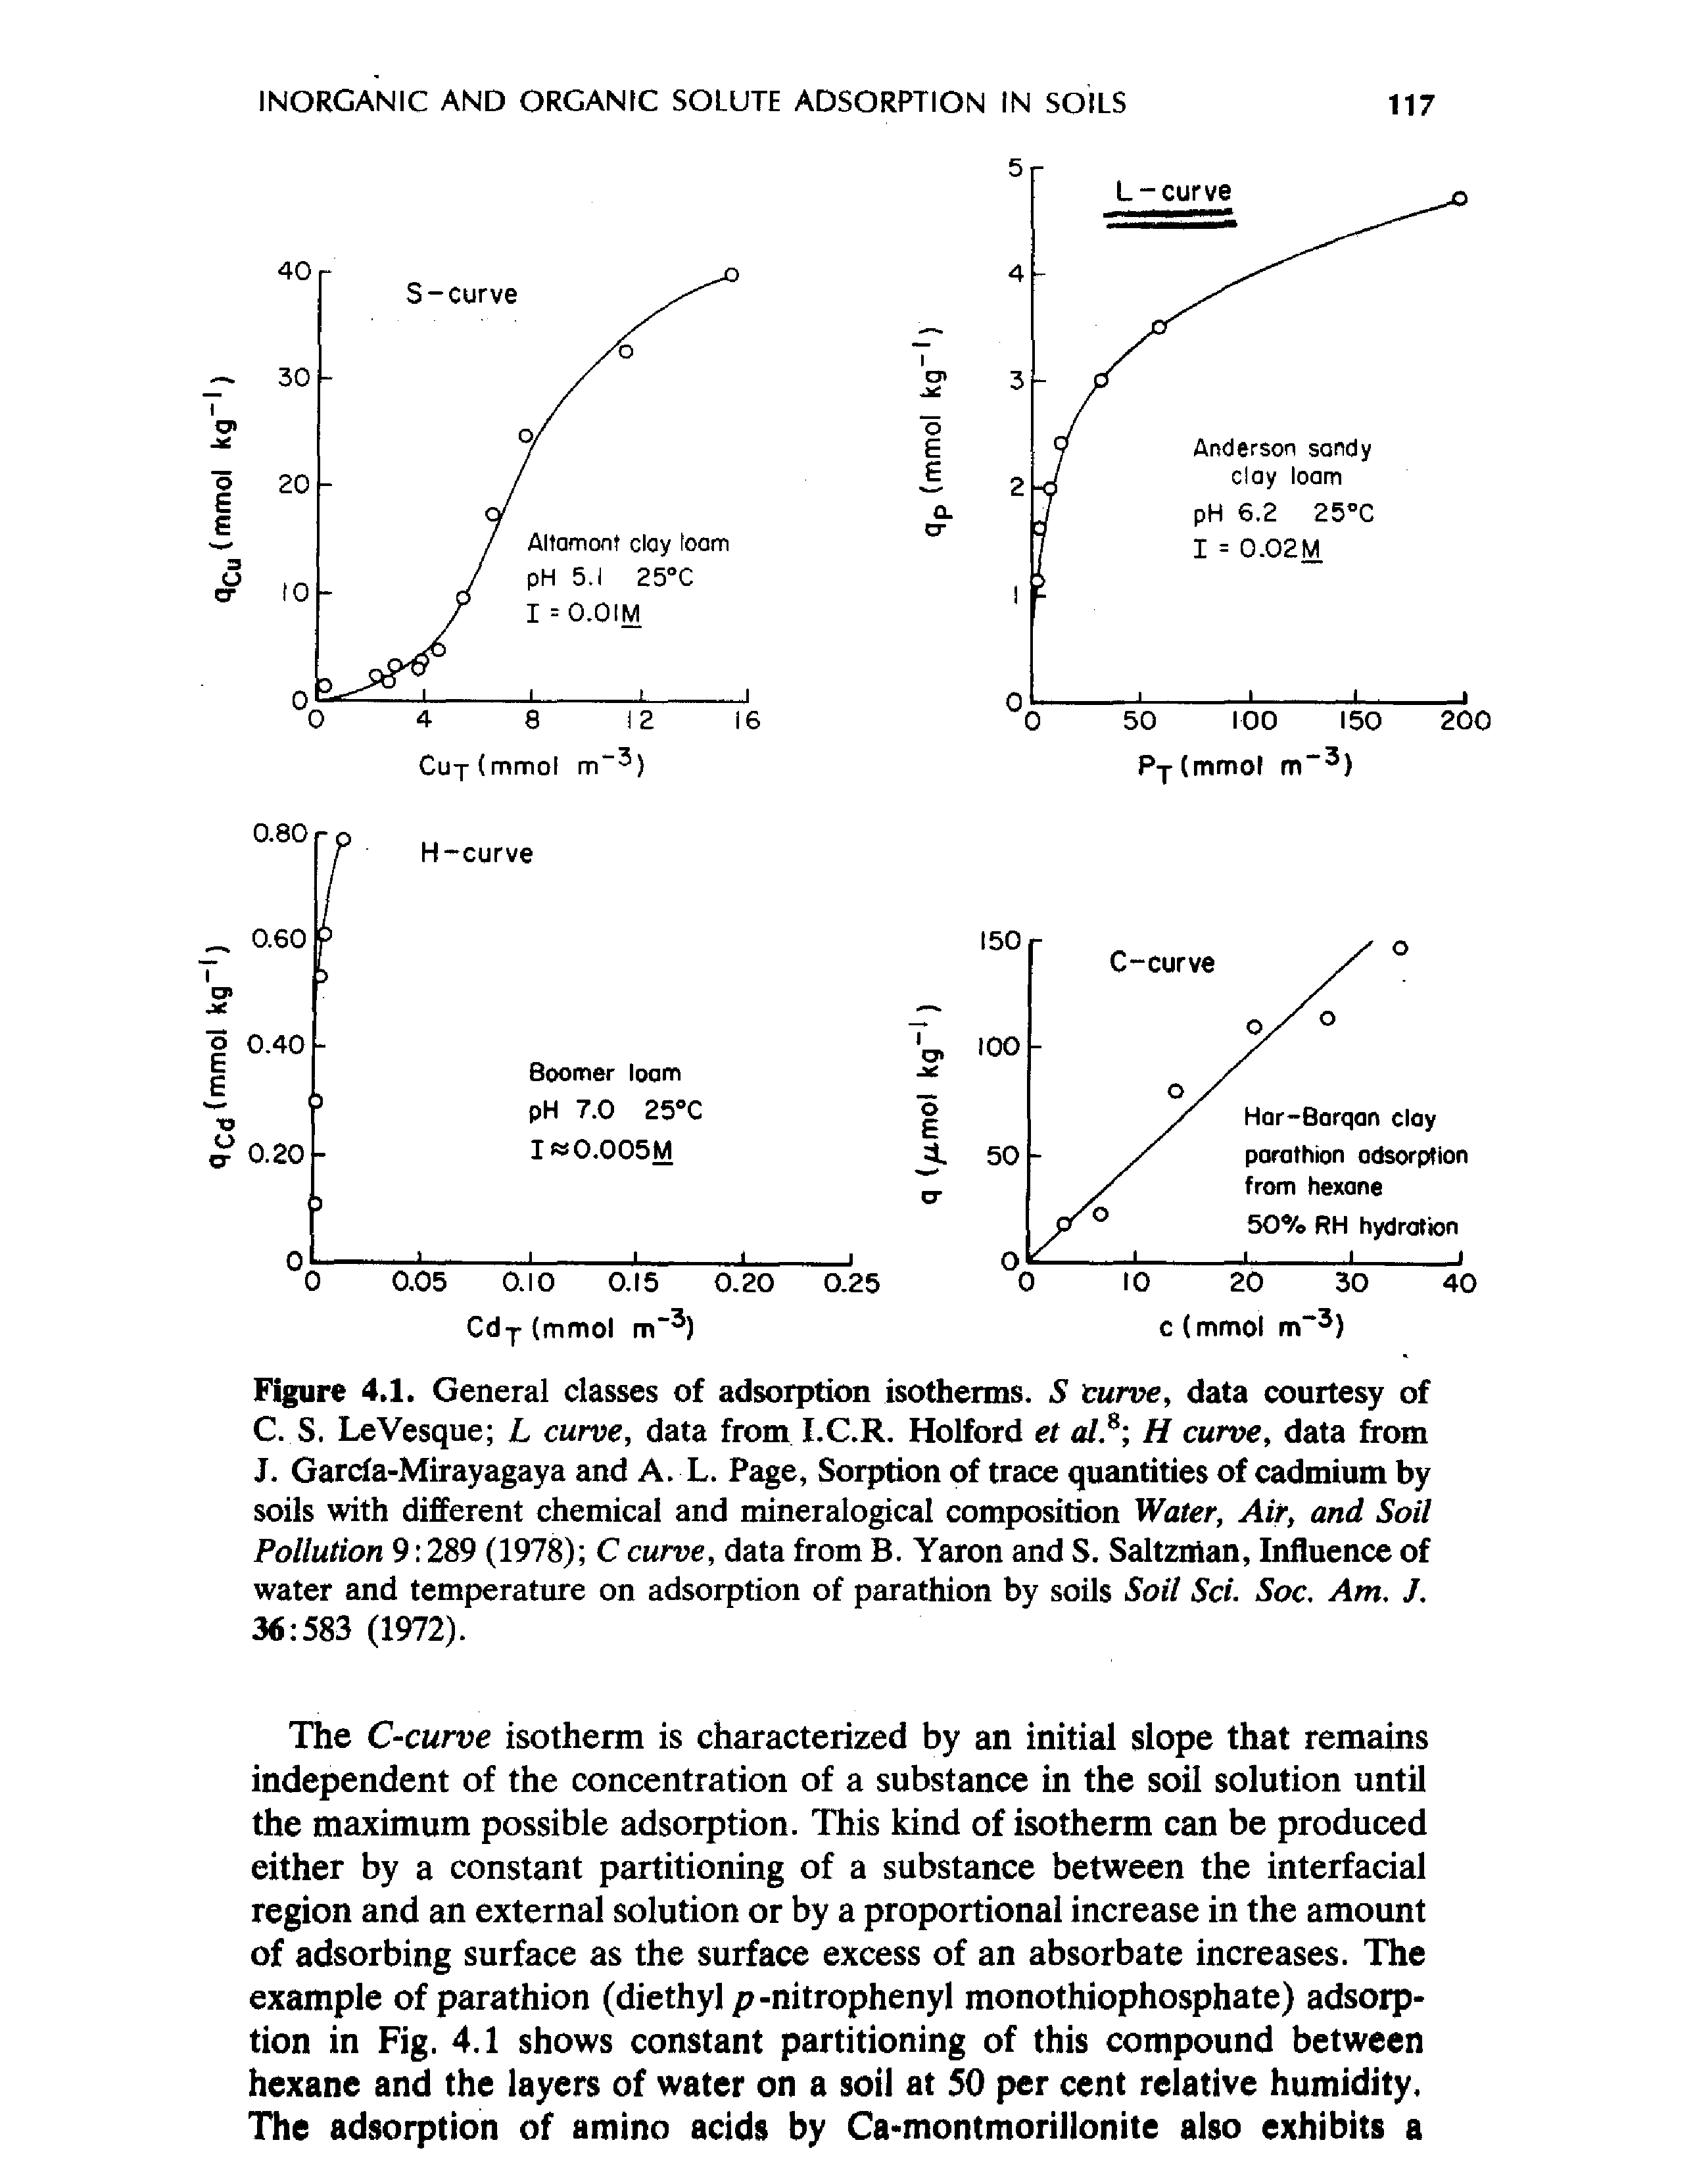 Figure 4.1. General classes of adsorption isotherms. 5 turve, data courtesy of C. S. LeVesque L curve, data from I.C.R. Holford et al. H curve, data from J. Garda-Mirayagaya and A. L. Page, Sorption of trace quantities of cadmium by soils with different chemical and mineralogical composition Water, Air, and Soil Pollution 9 289 (1978) C curve, data from B. Yaron and S. Saltzntan, Influence of water and temperature on adsorption of parathion by soils Soil Sci. Soc. Am, J, 36 583 (1972).